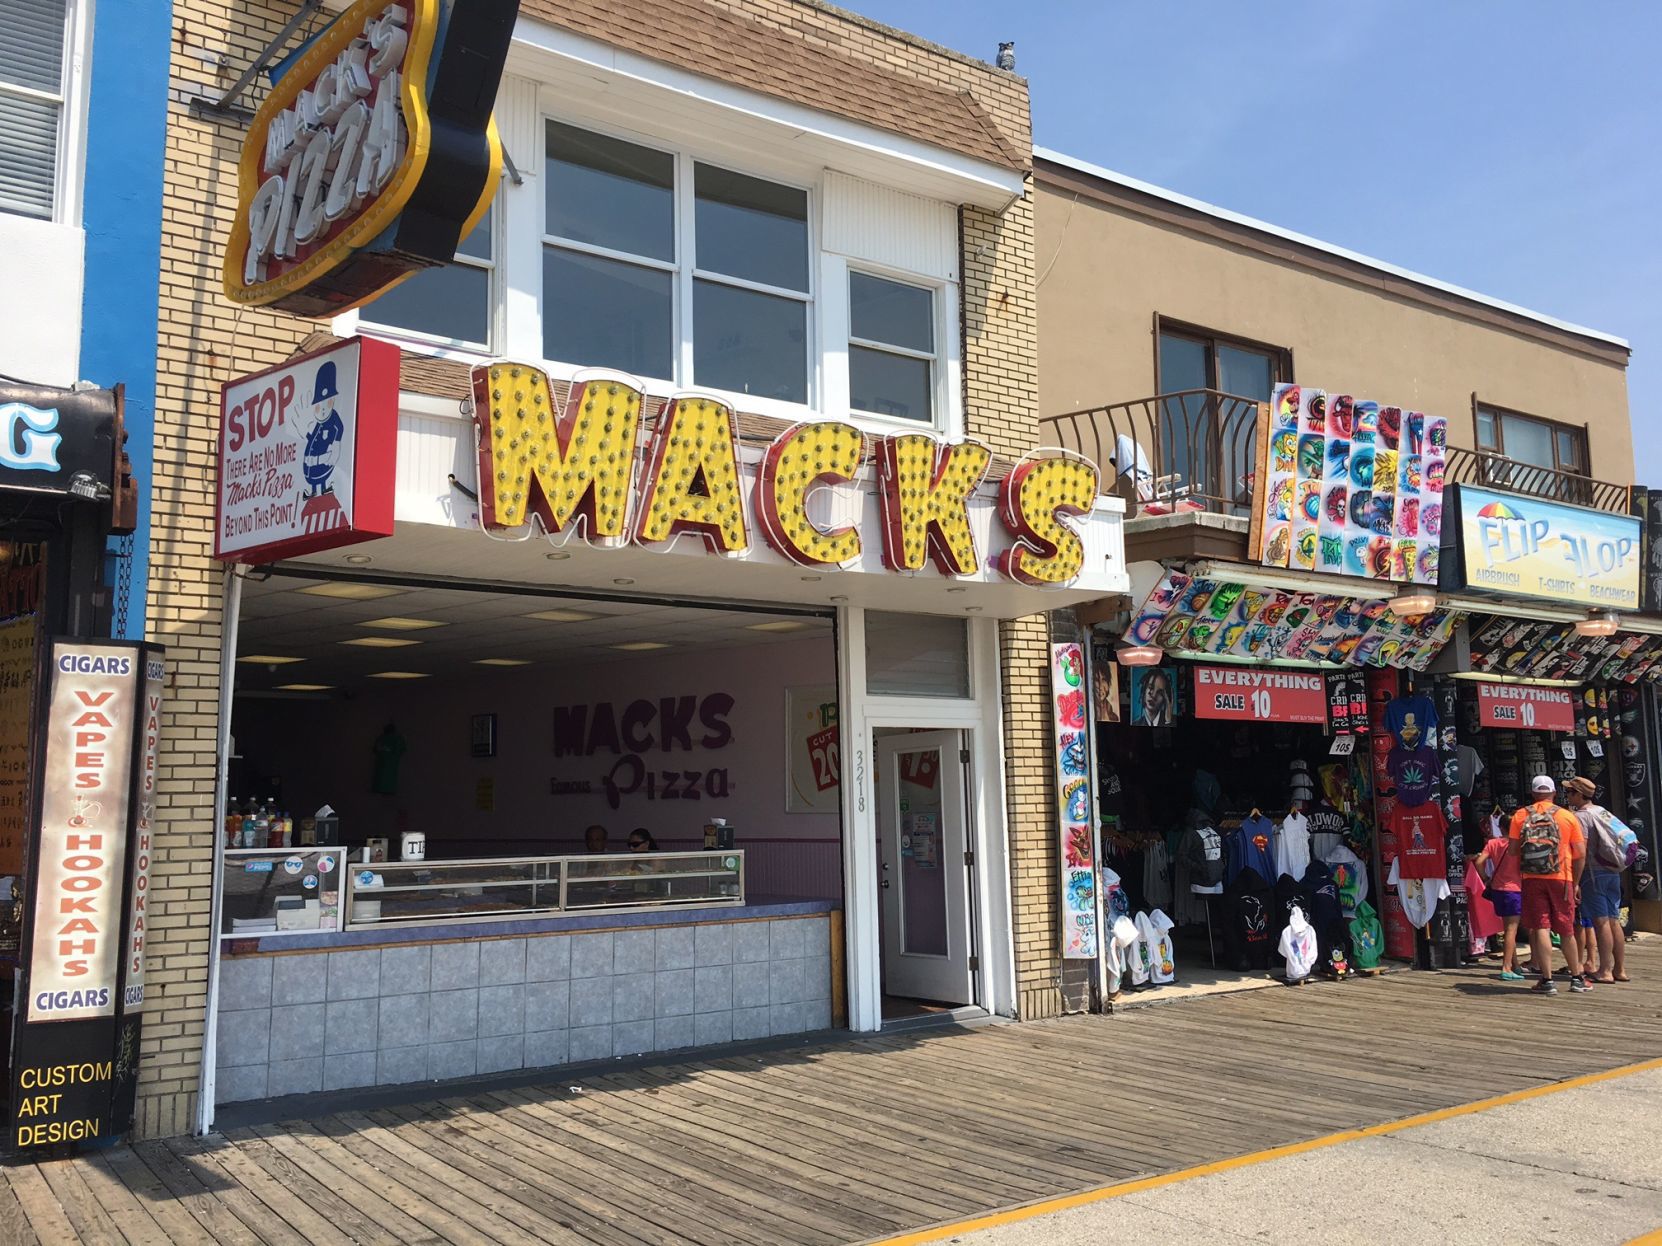 Macks Pizza founder was a Wildwood icon pic